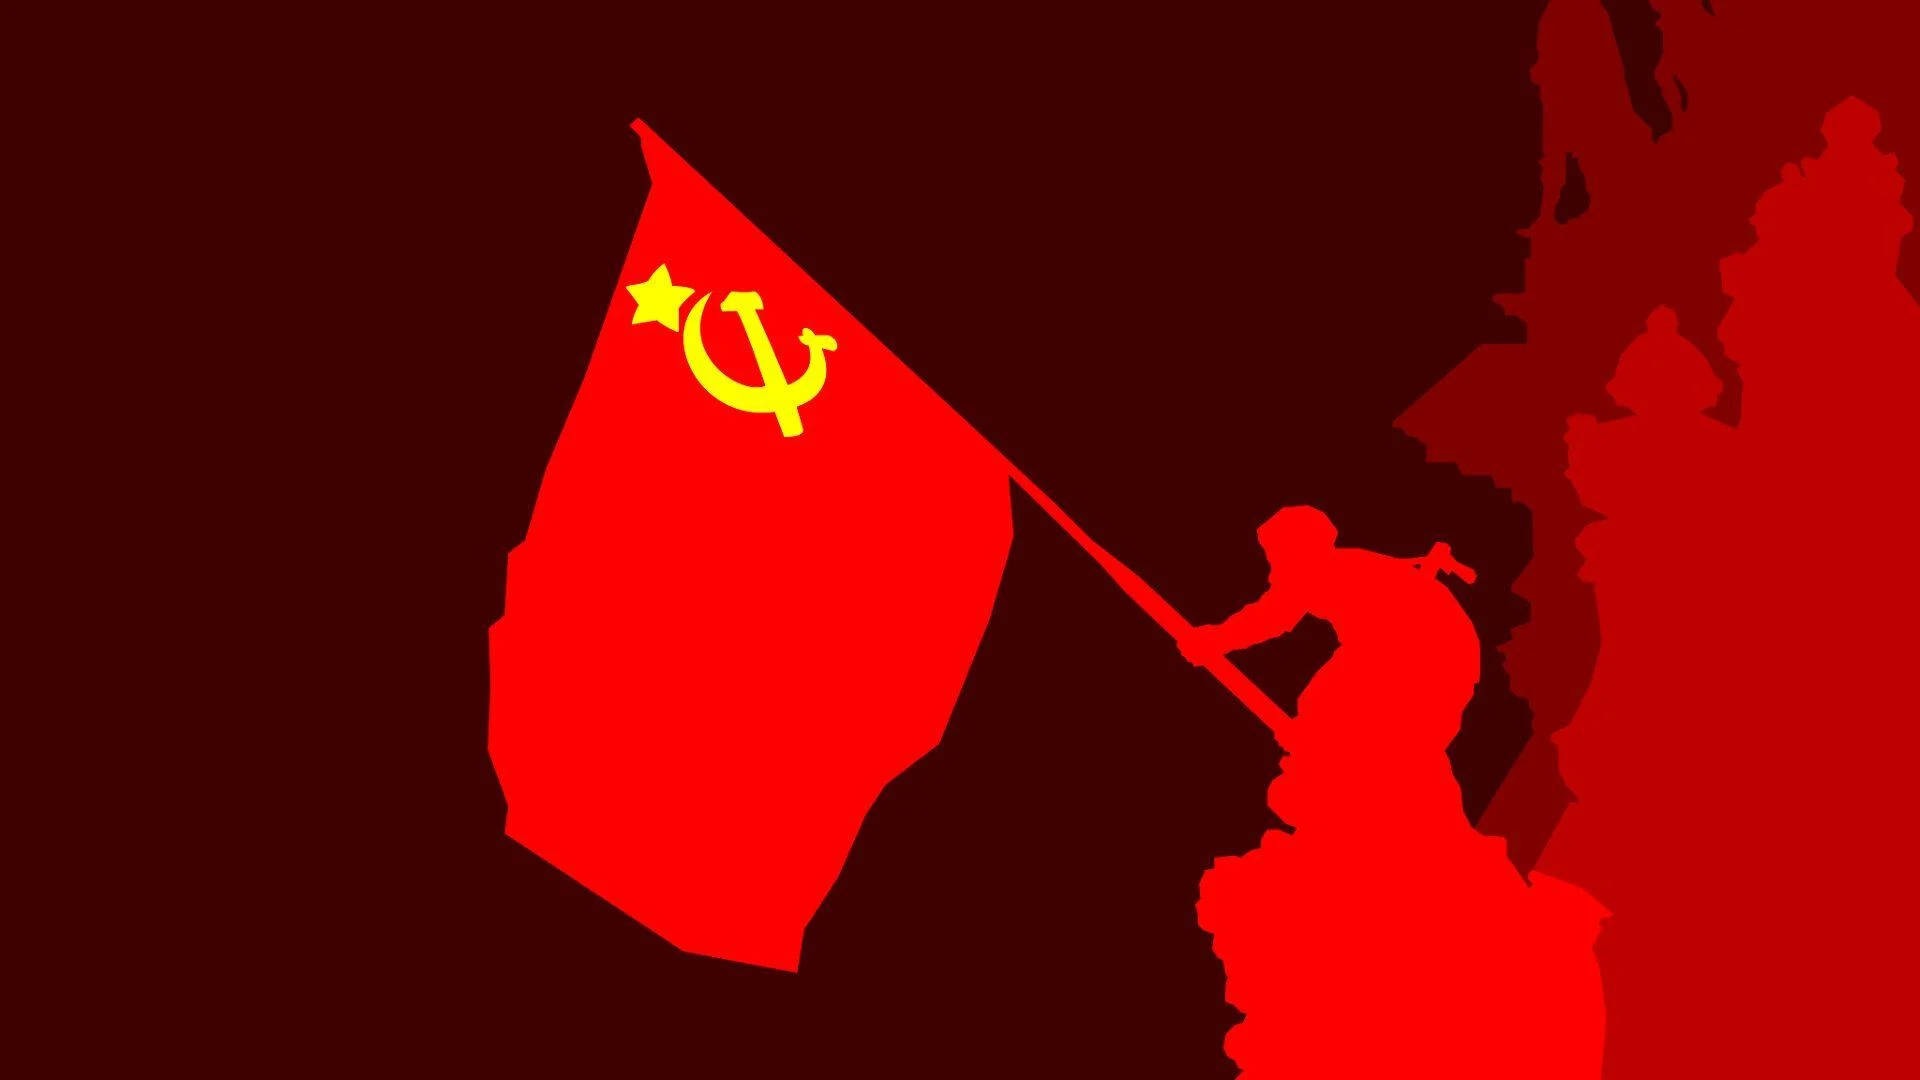 Caption: Majestic Soviet Union Flag in Red Shadow Wallpaper